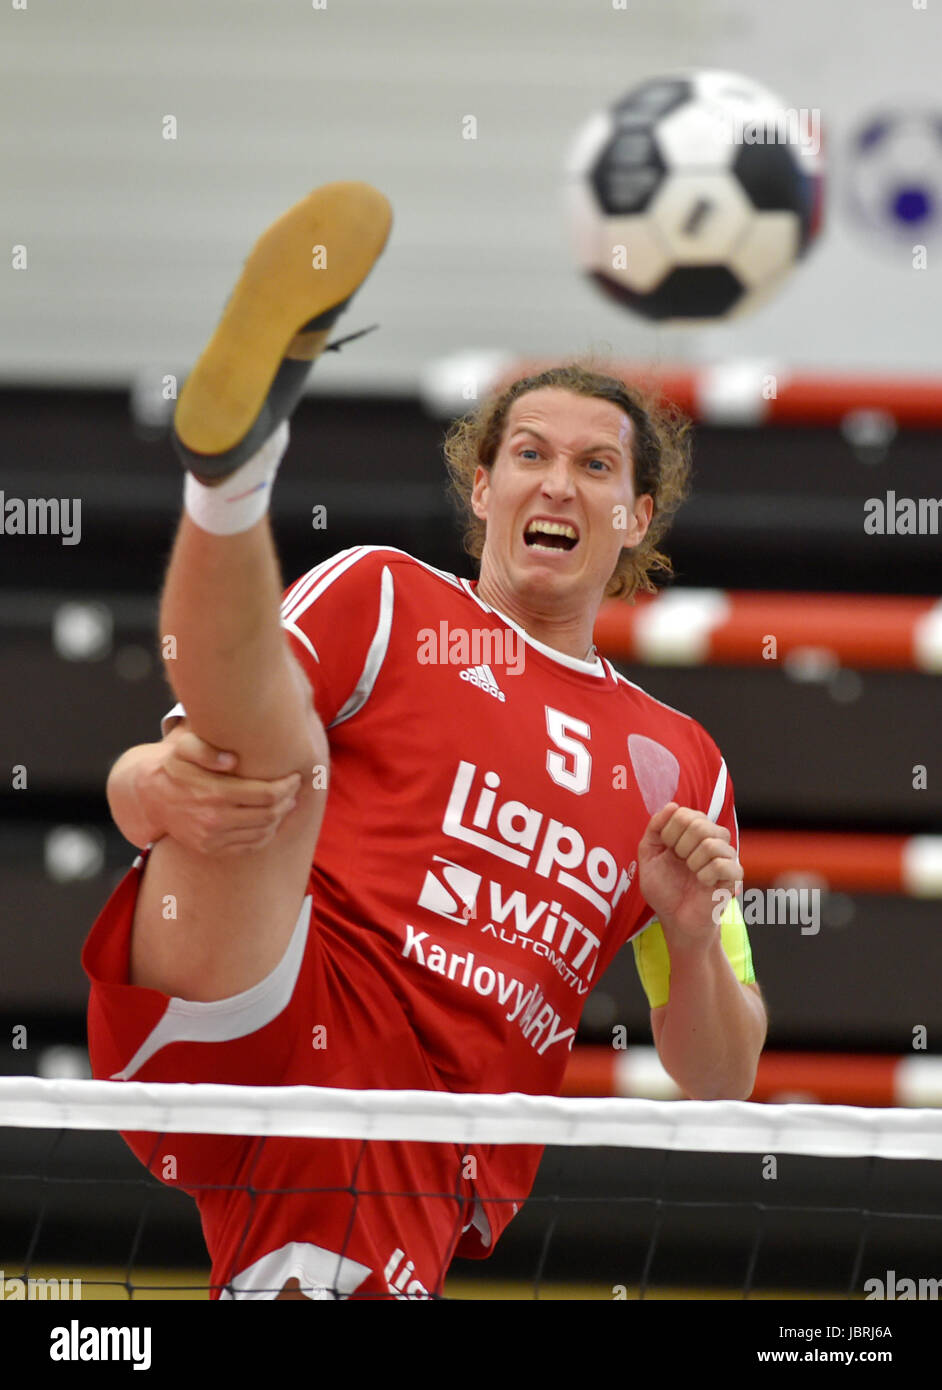 Karlovy Vary, Czech Republic. 10th June, 2017. Jan Vanke, player of Karlovy Vary, in action during the UNIF Club World Cup 2017 match between SK Liapor Witte Karlovy Vary - NO KAC Jednota Kosice in Karlovy Vary, Czech Republic on June 10, 2017. Credit: Slavomir Kubes/CTK Photo/Alamy Live News Stock Photo